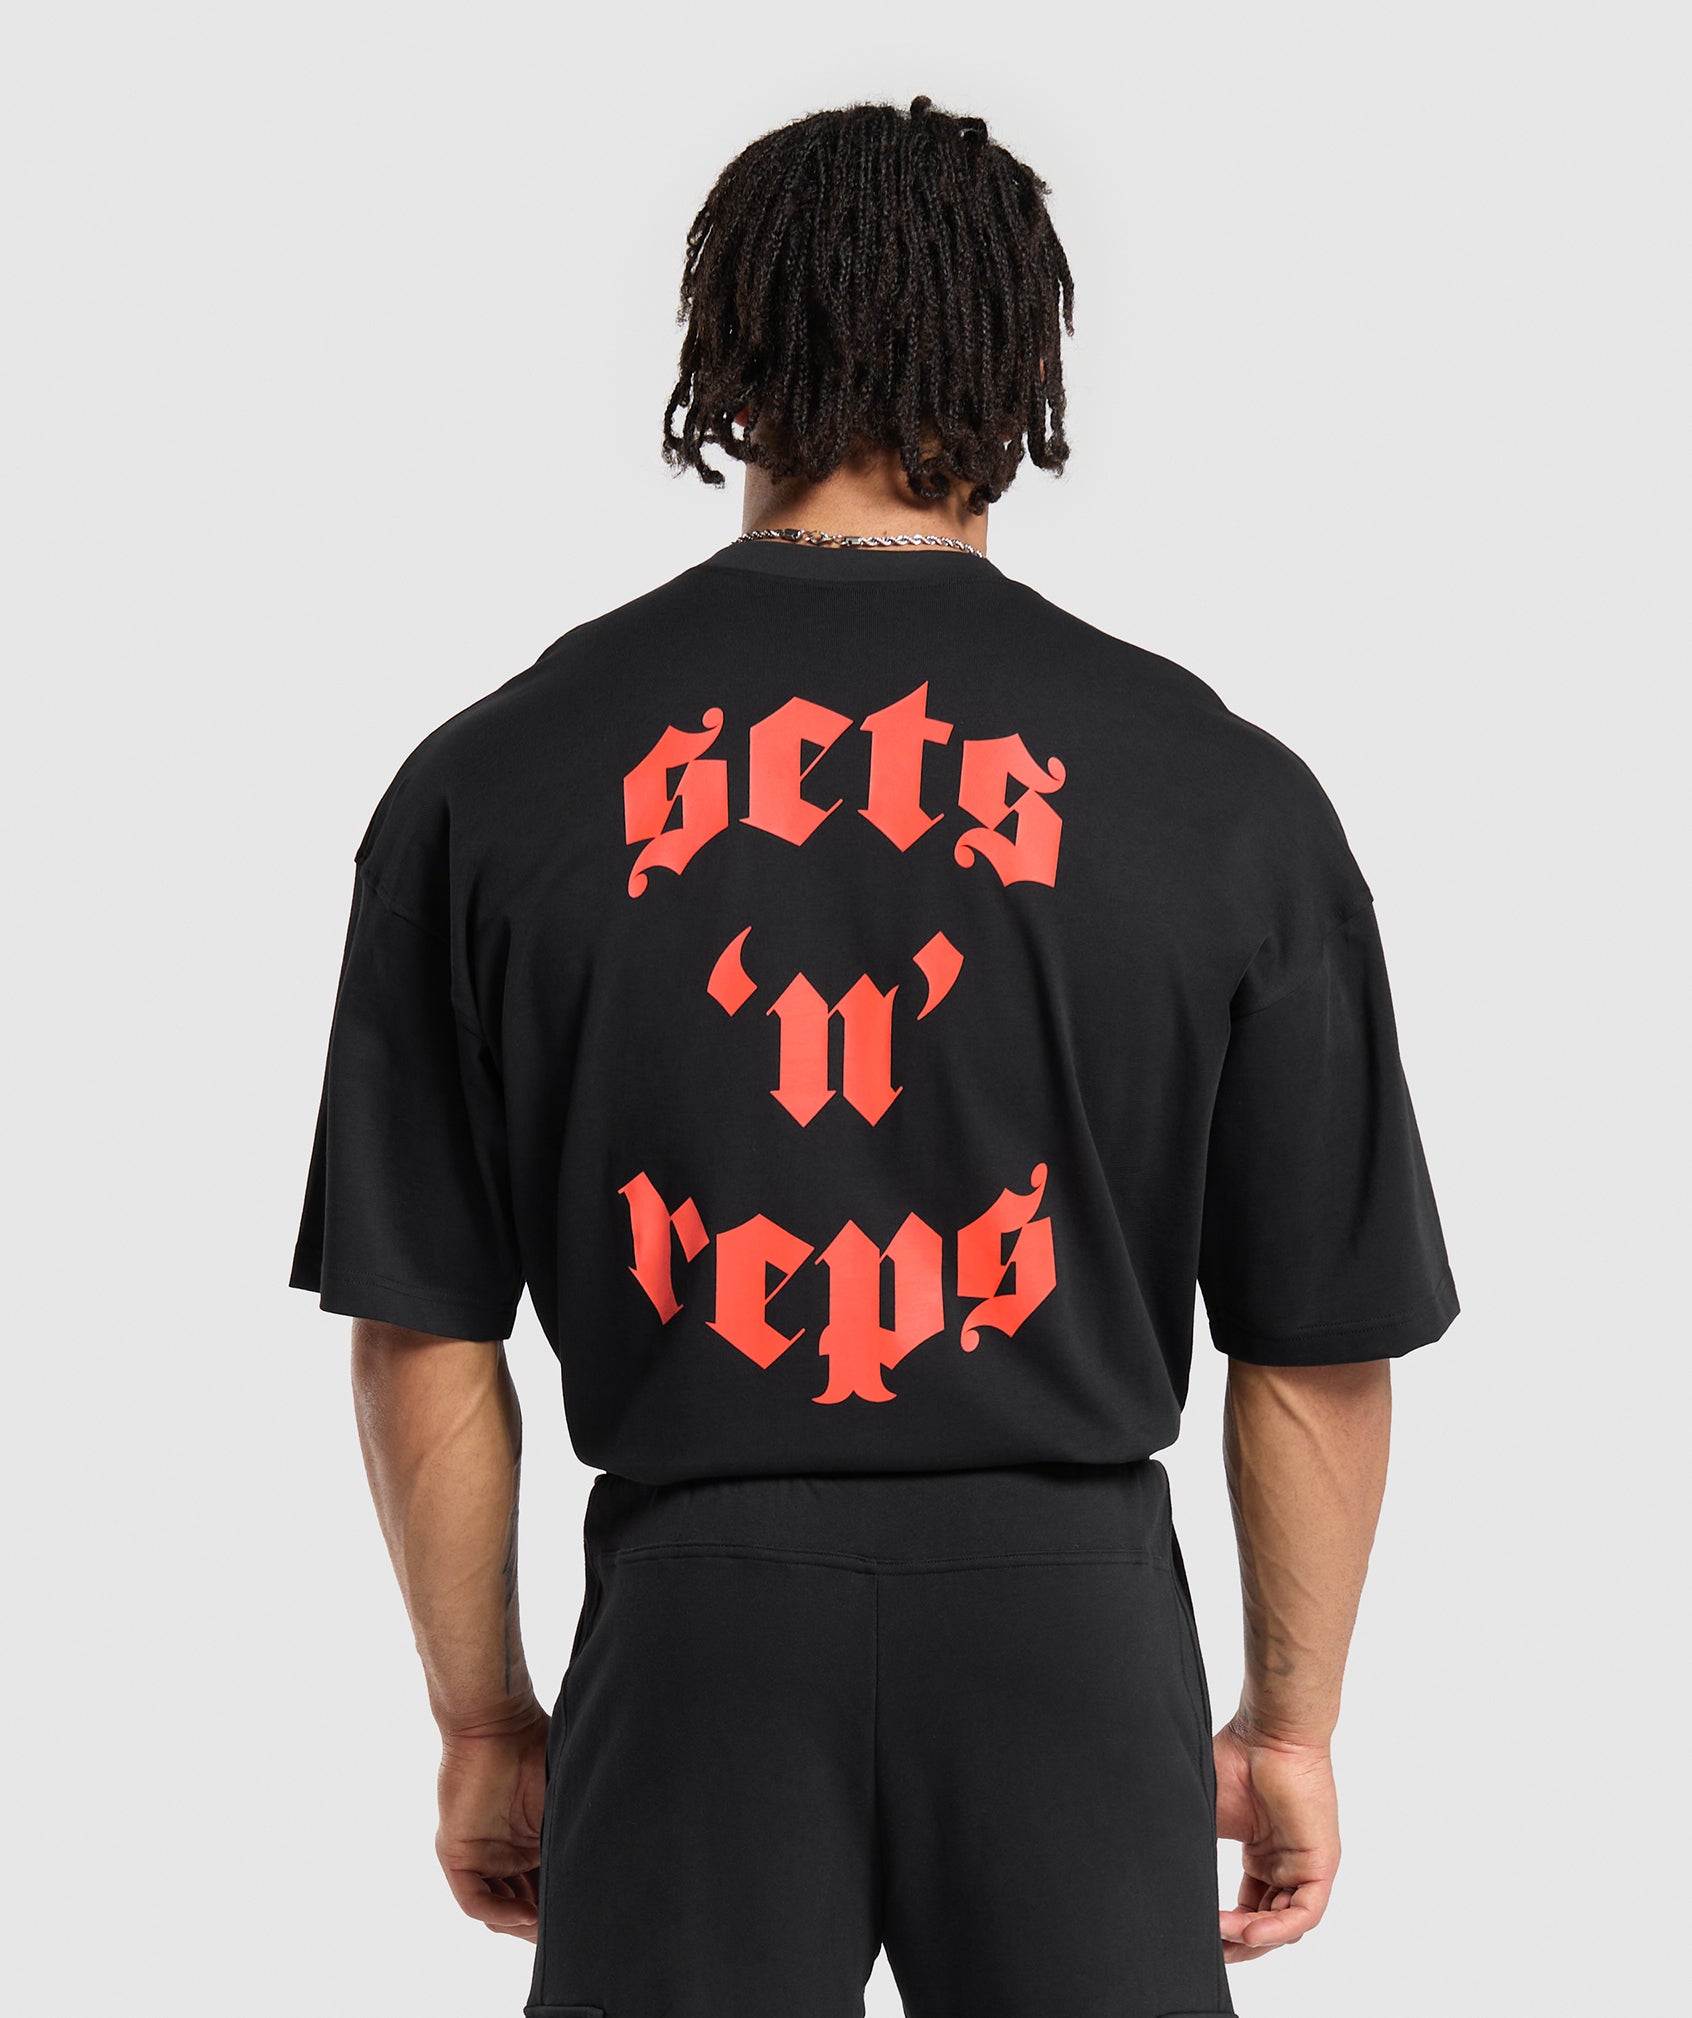 Sets N Reps T-Shirt in Black - view 1